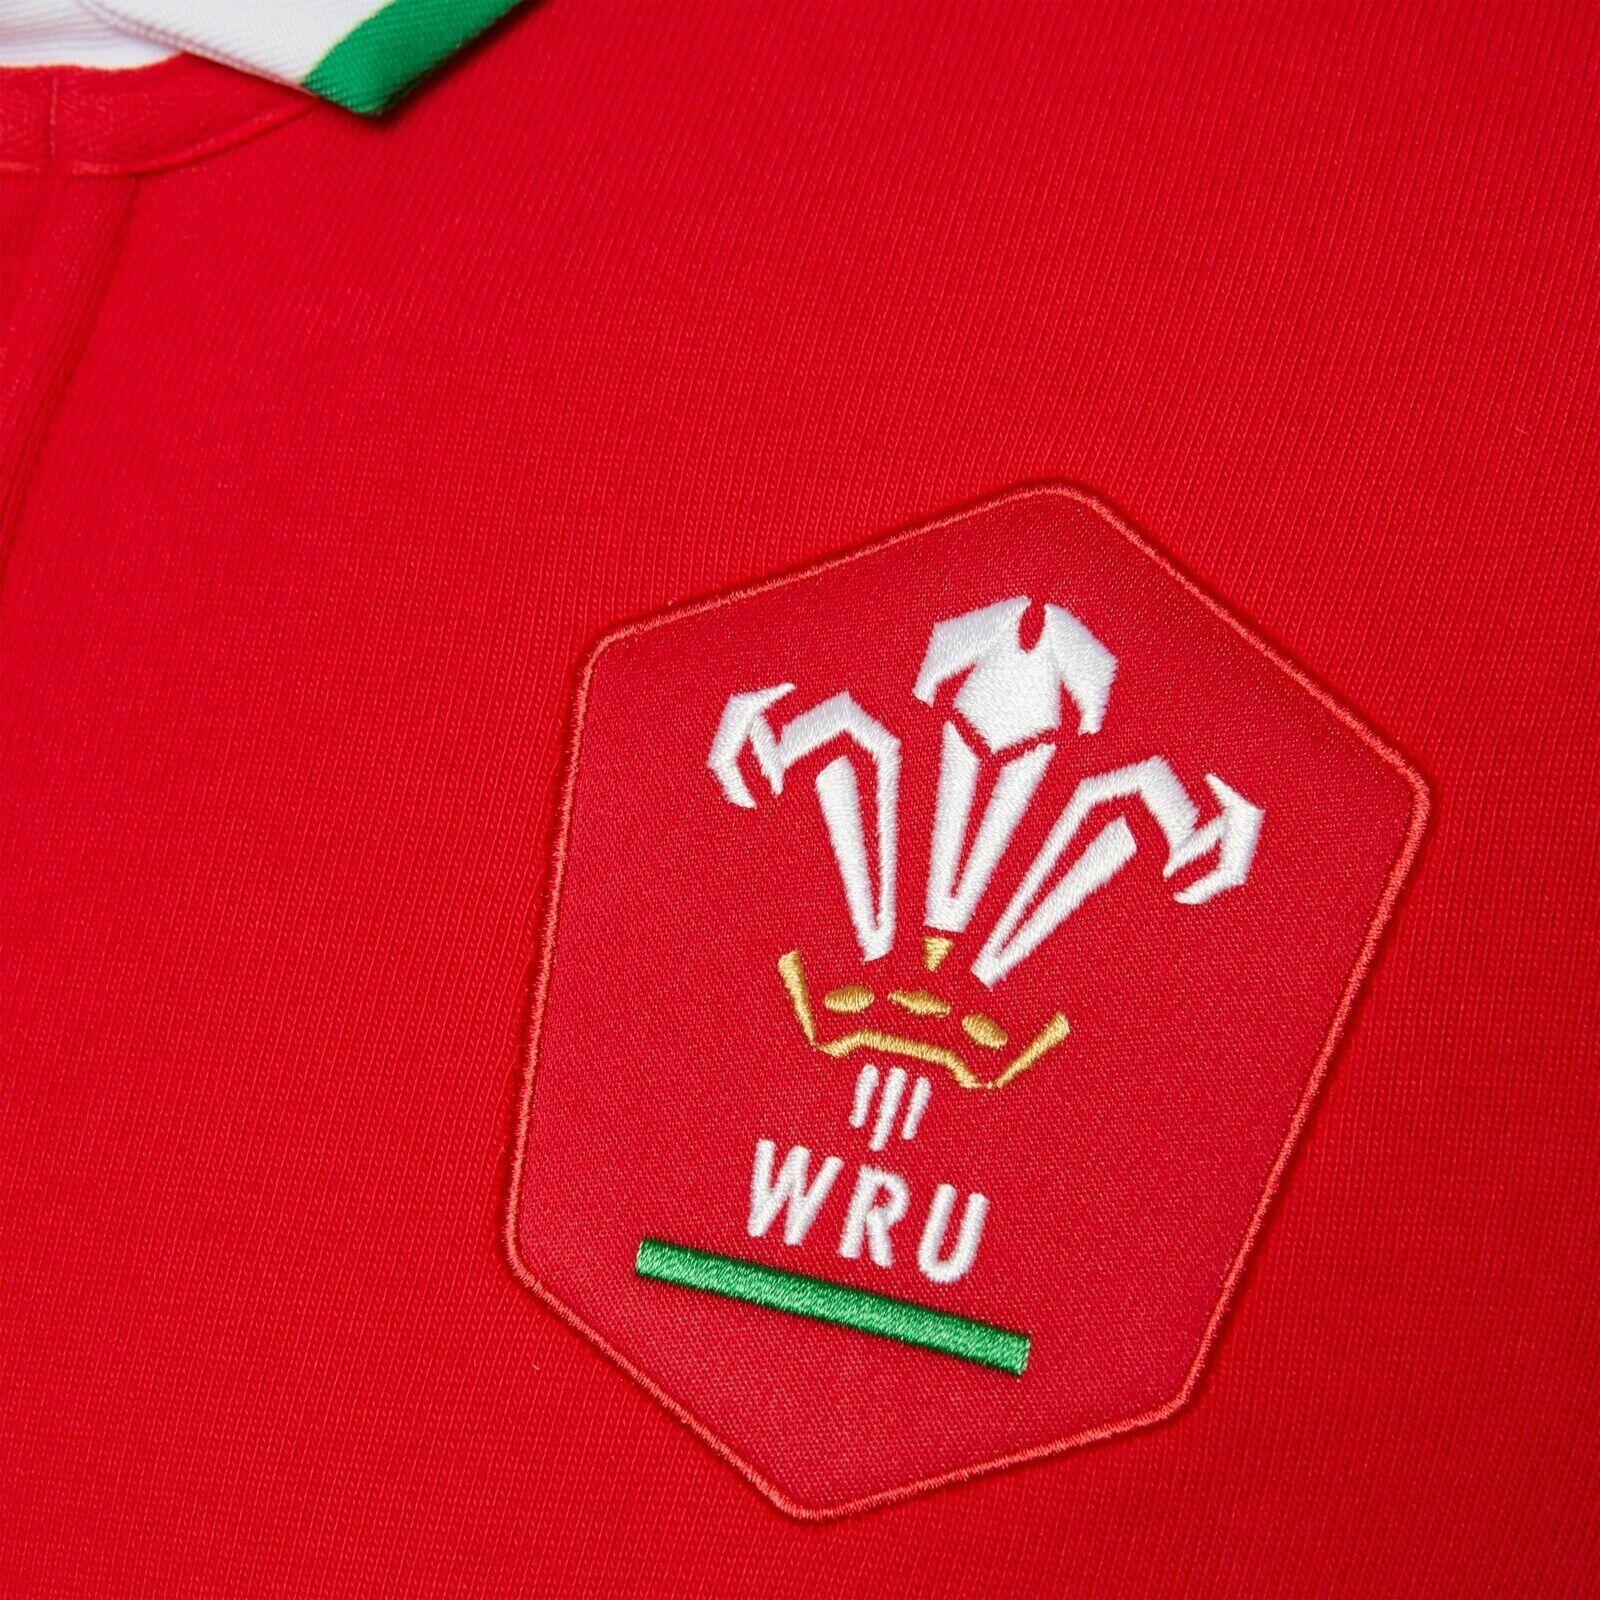 Macron Wales WRU Mens Home Cotton L/S Rugby Shirt 58125449 Red 3/4